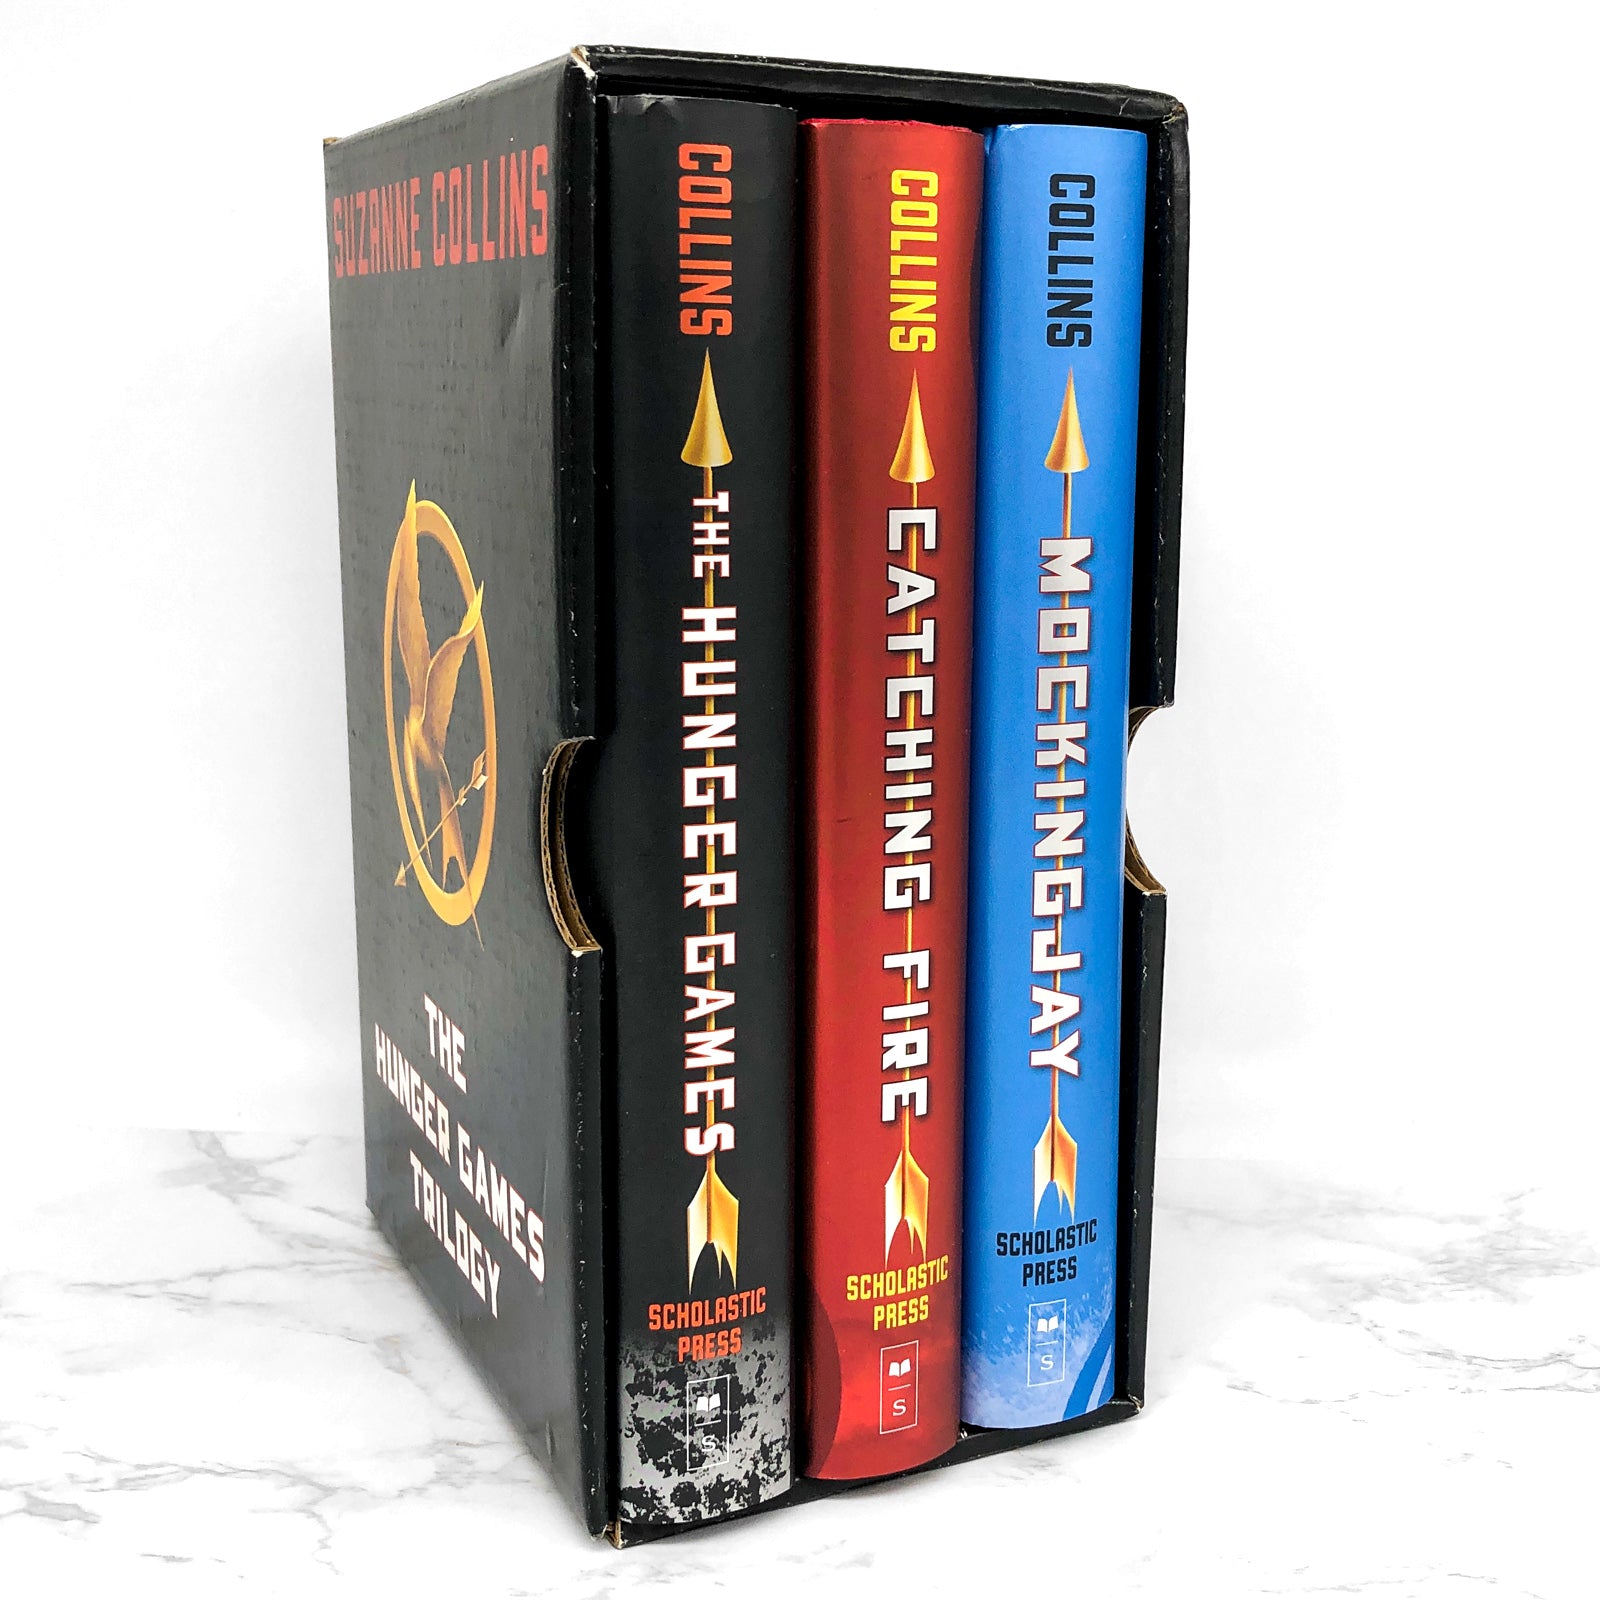 The Hunger Games Trilogy by Suzanne Collins [FIRST EDITION BOX-SET] 20